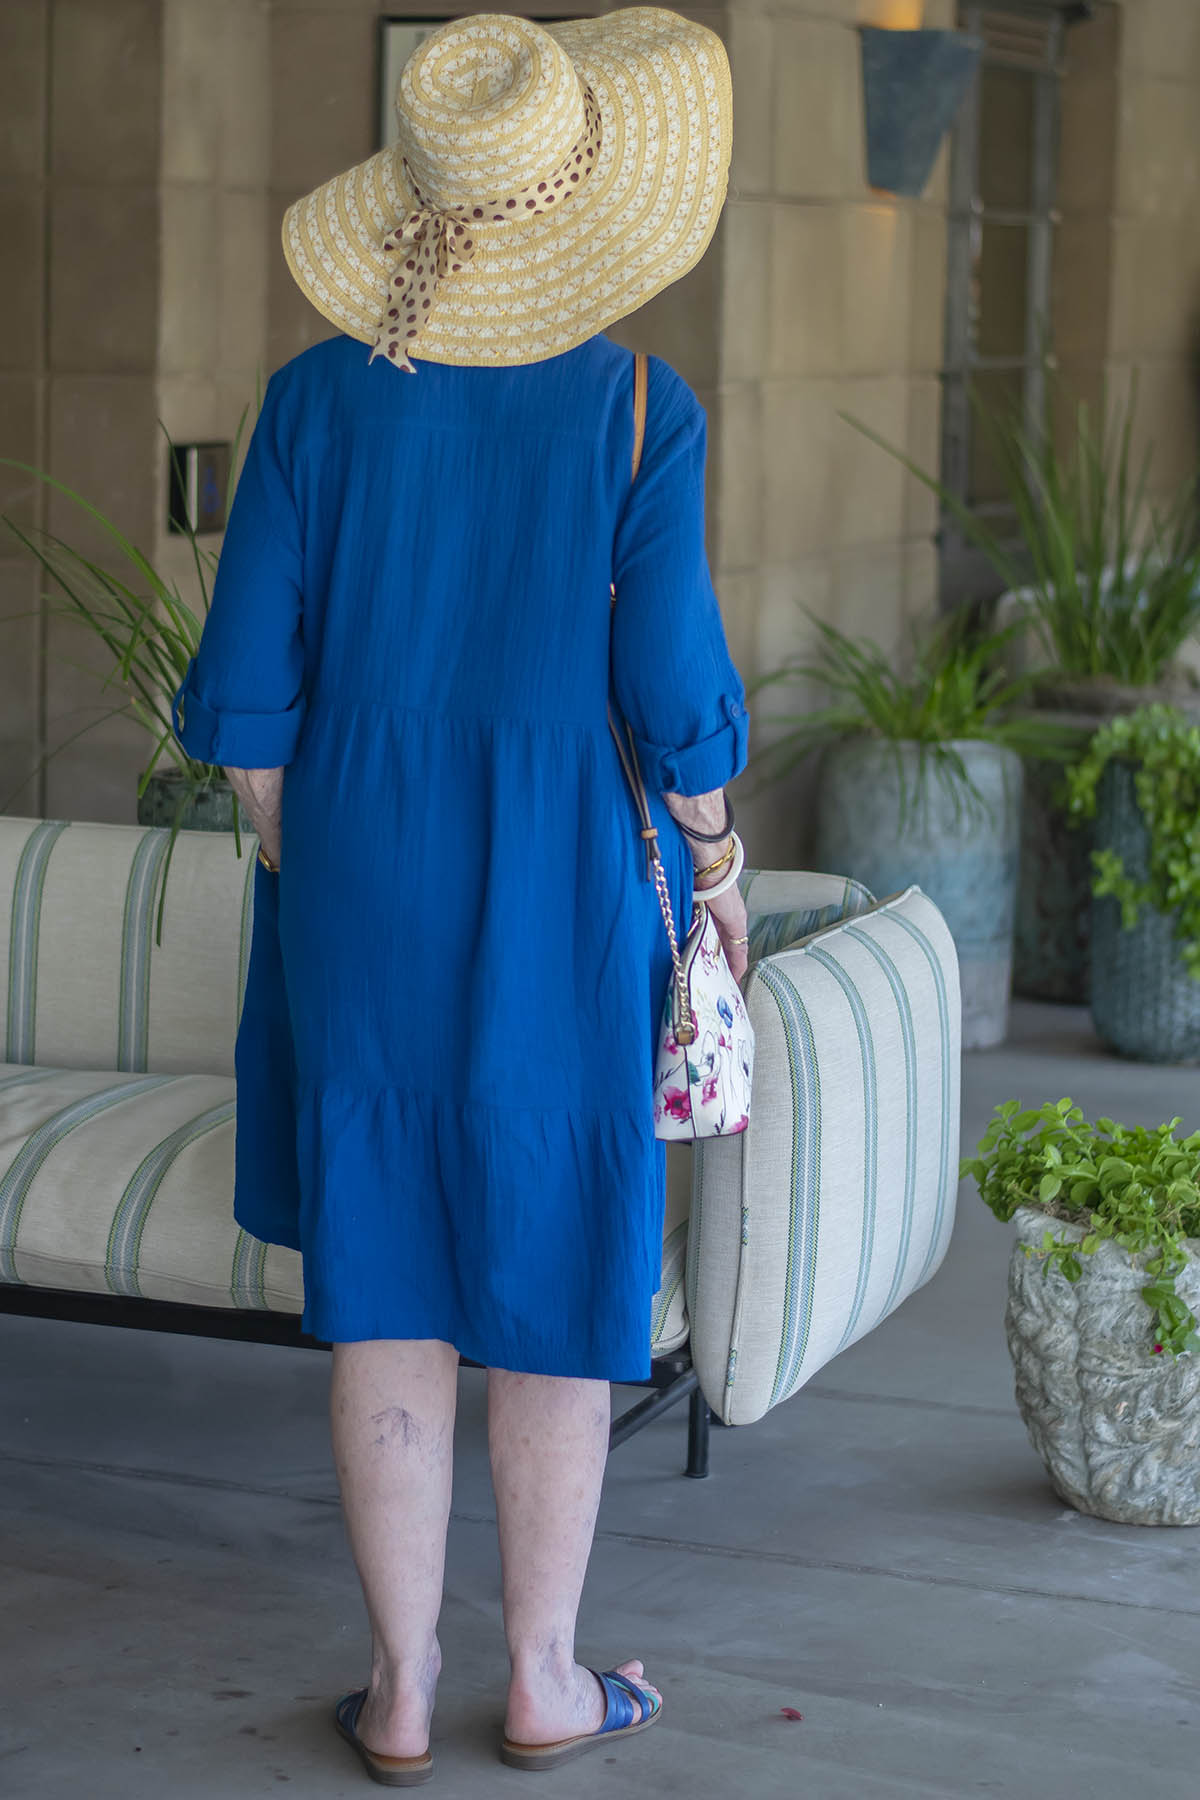 Tiered dress for resort wear for women over 50